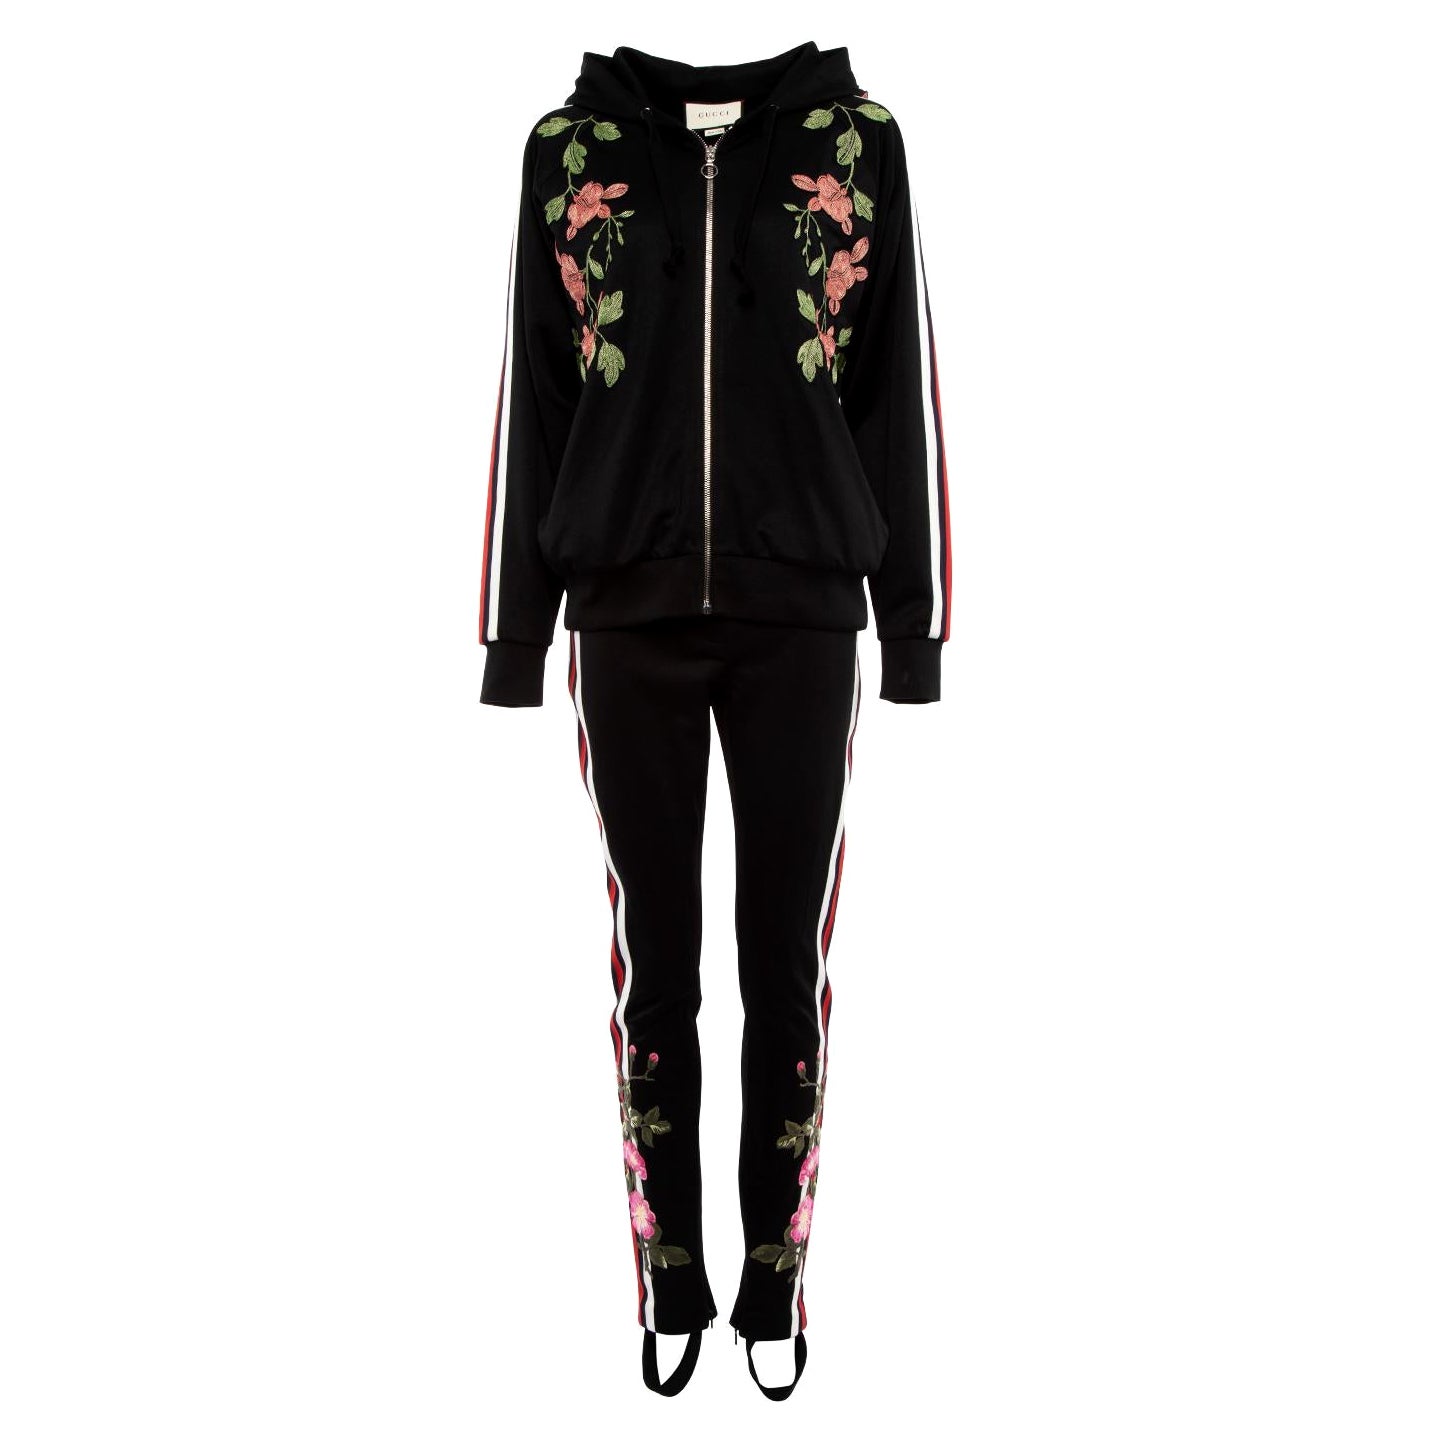 Gucci Embroidered Track Jacket and Jodpers Set Size S For Sale